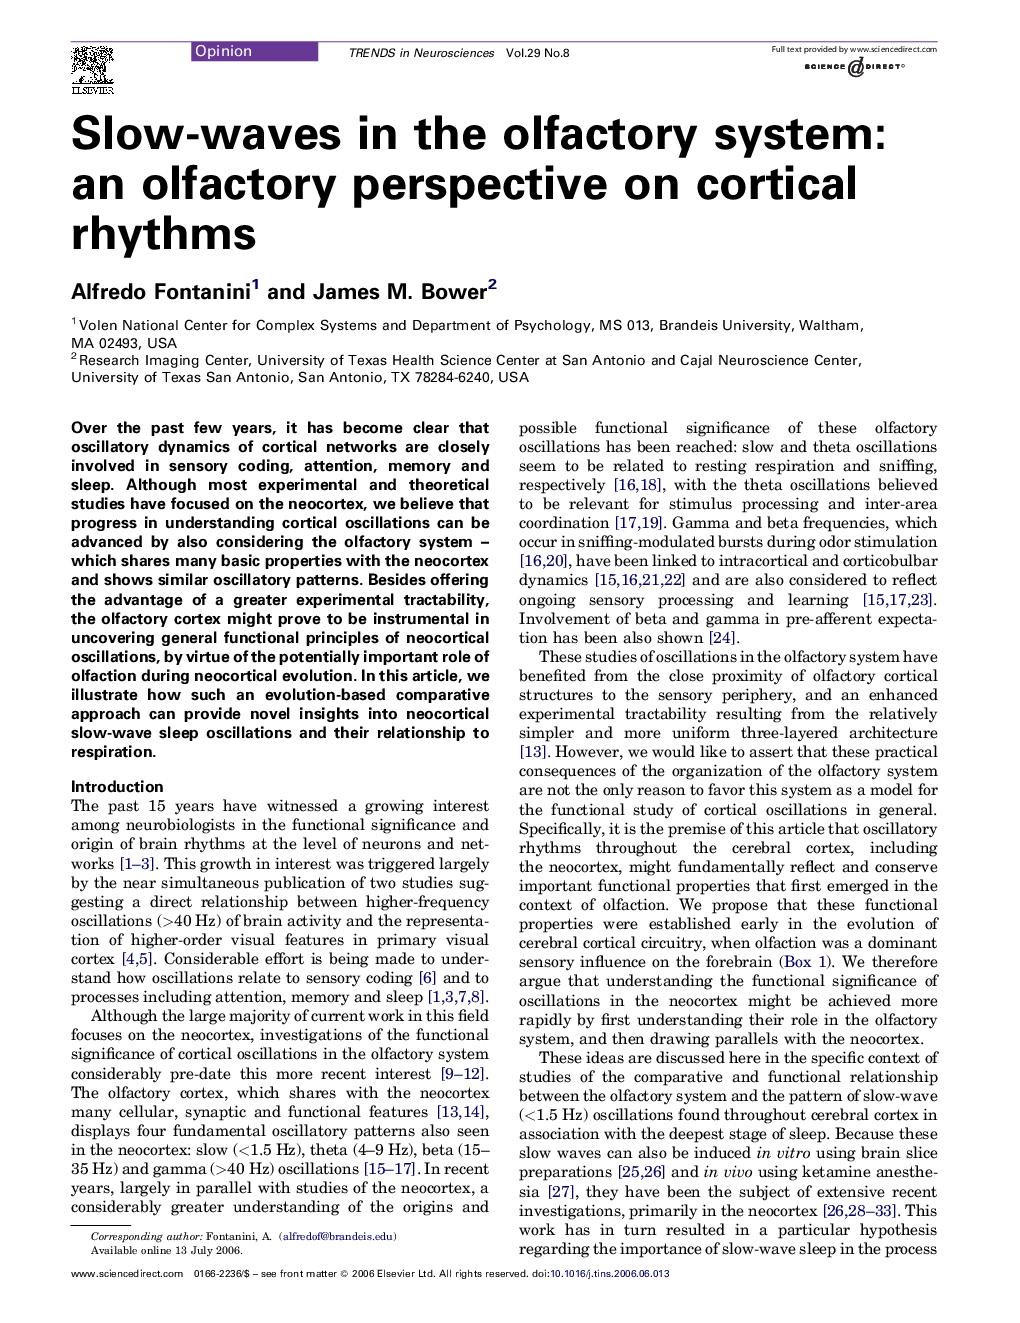 Slow-waves in the olfactory system: an olfactory perspective on cortical rhythms